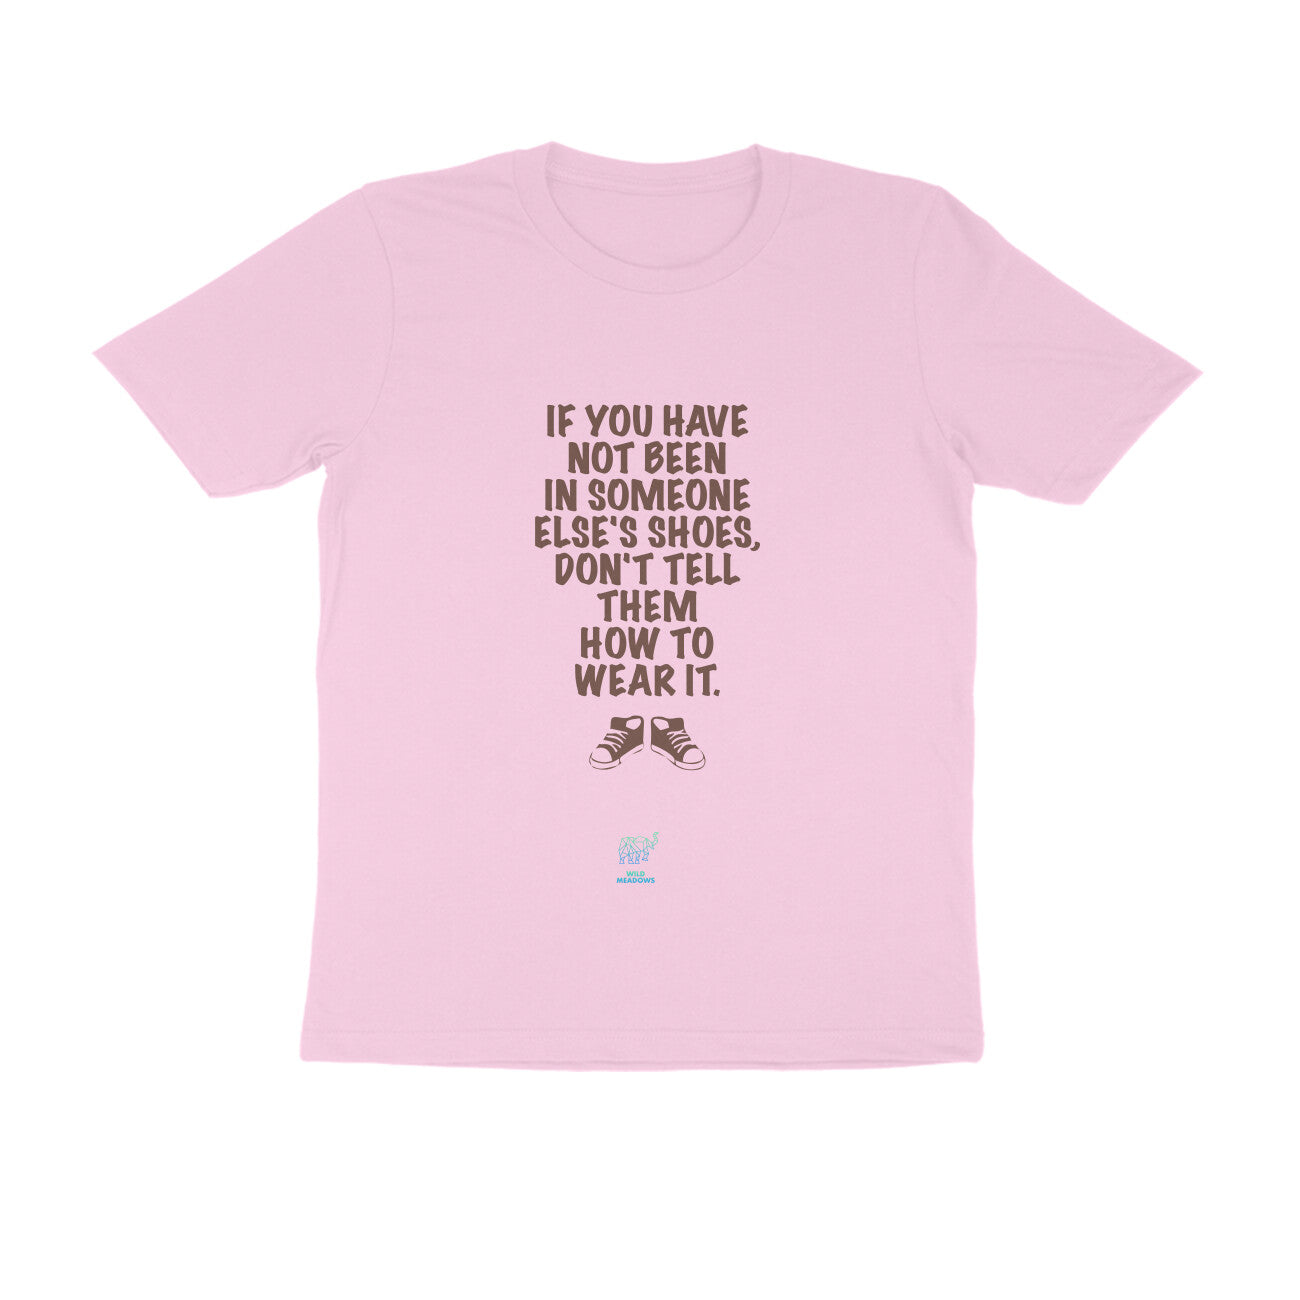 Gospel ( If you have not been in someone else's shoes, don't tell them how to wear it )- Unisex Tees